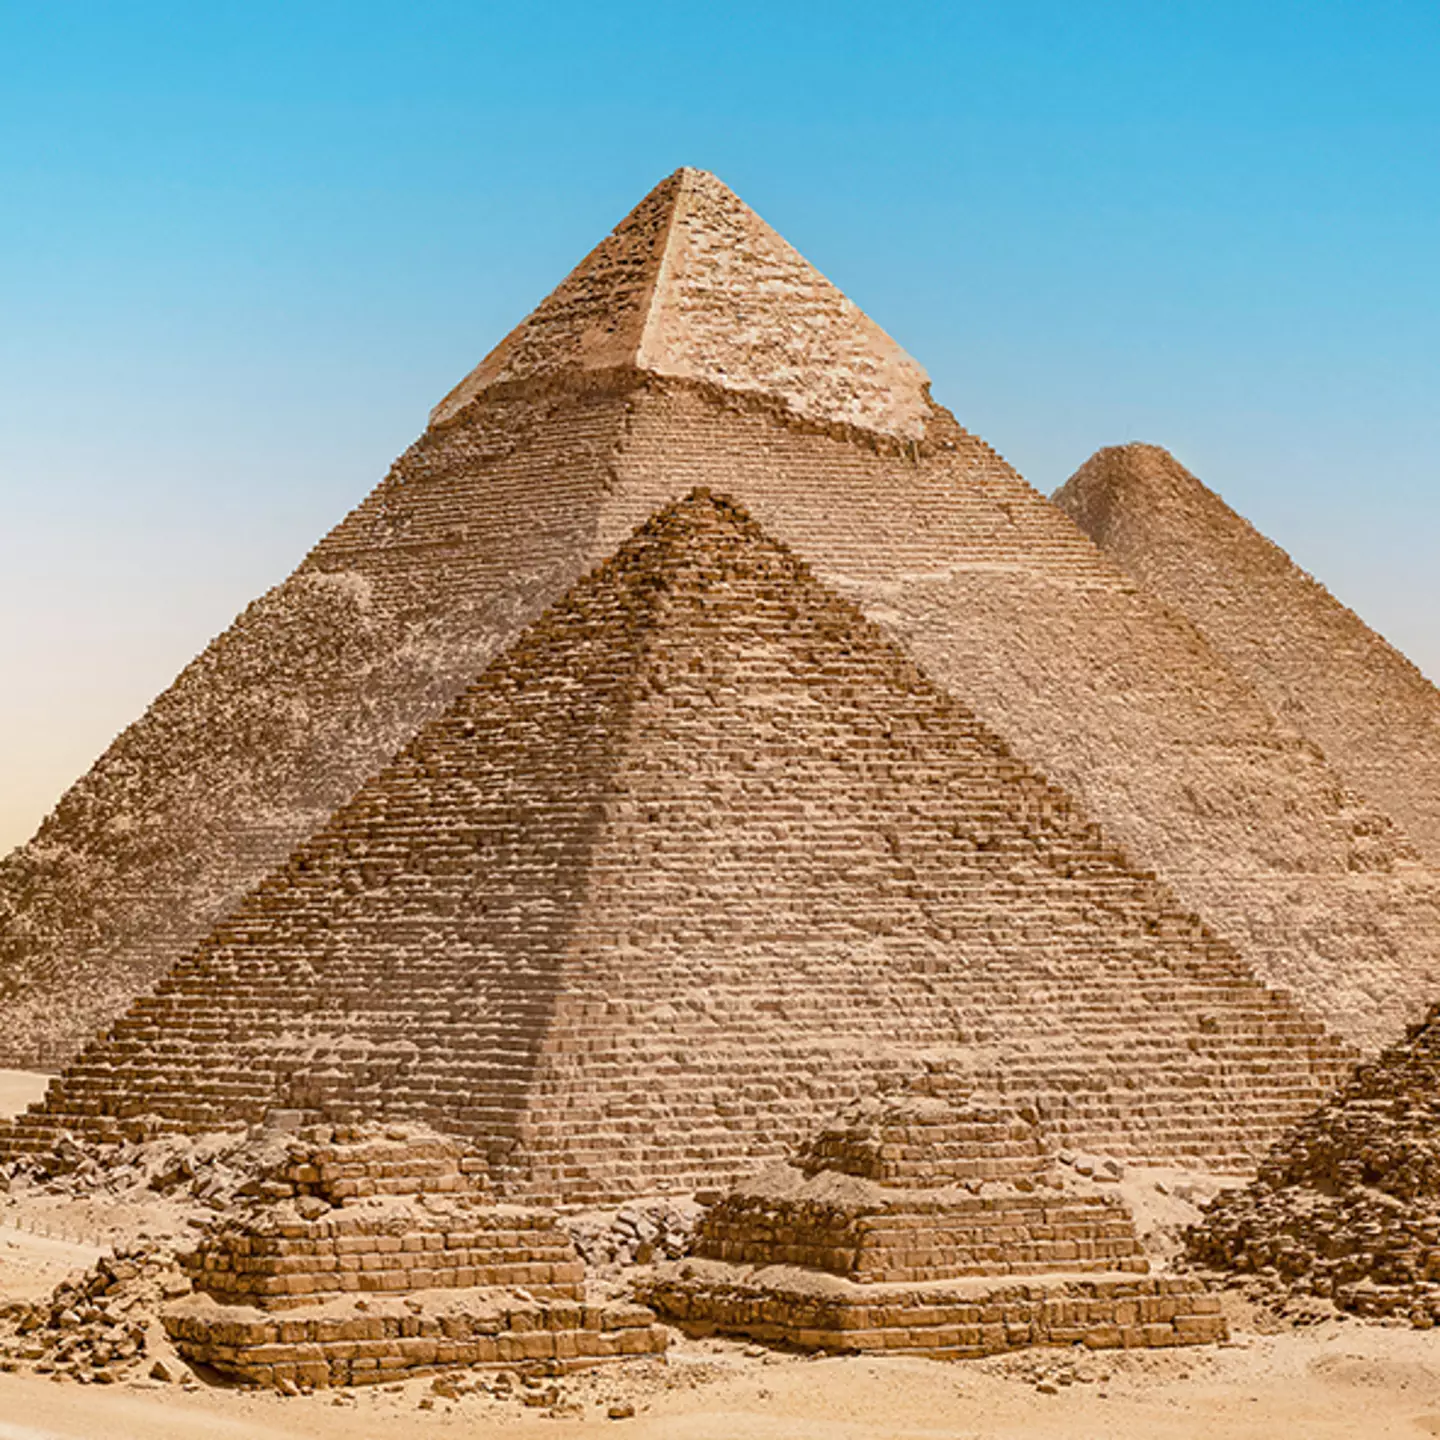 Discovery from space shows that the pyramids were built using water